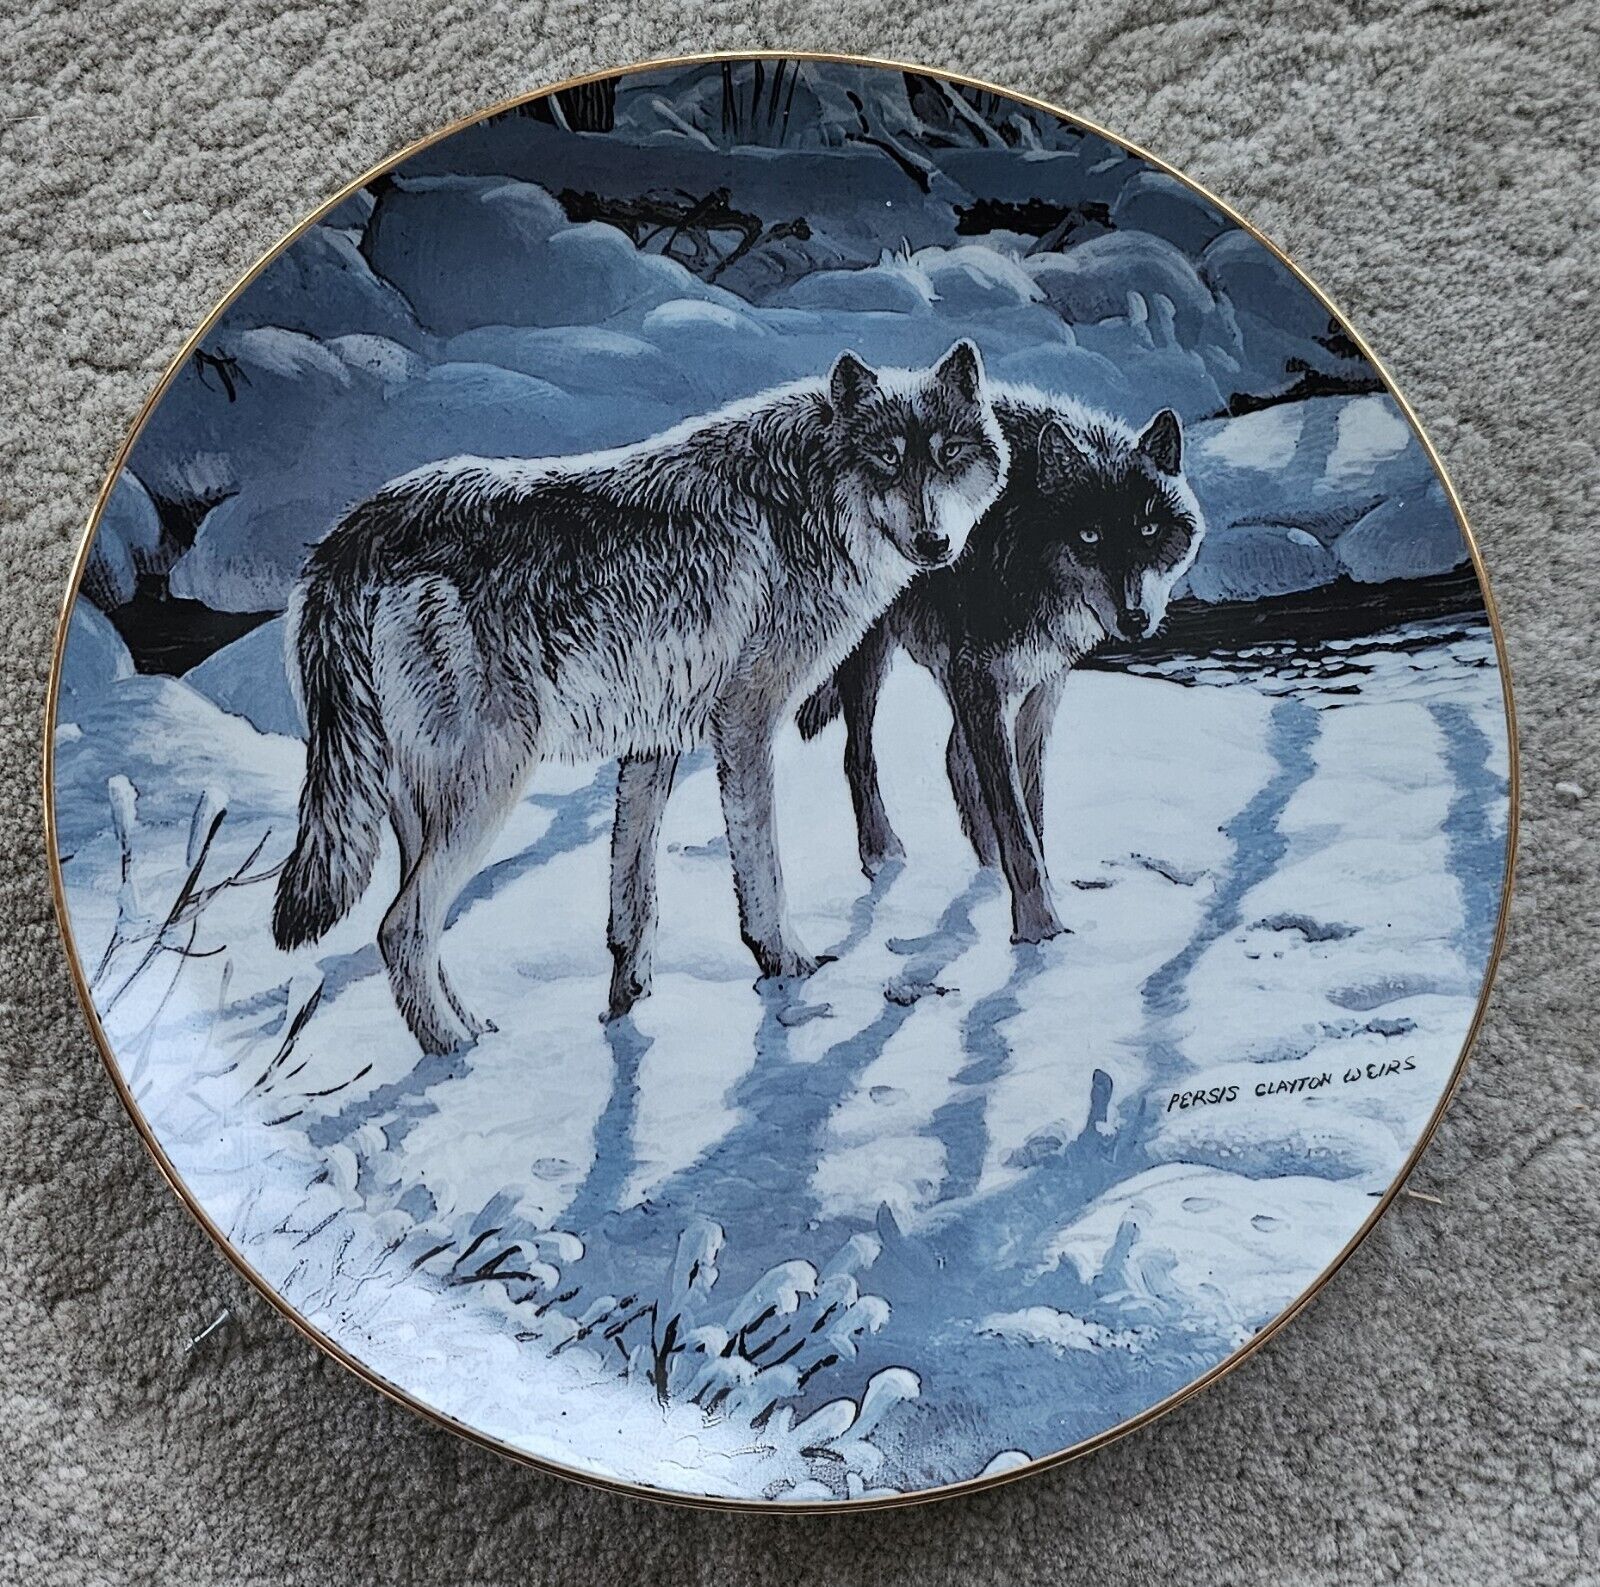 SILVER SHADOWS-WOLVES Persis Clayton Weirs Limited Ed 1987 Collector Plate Wild